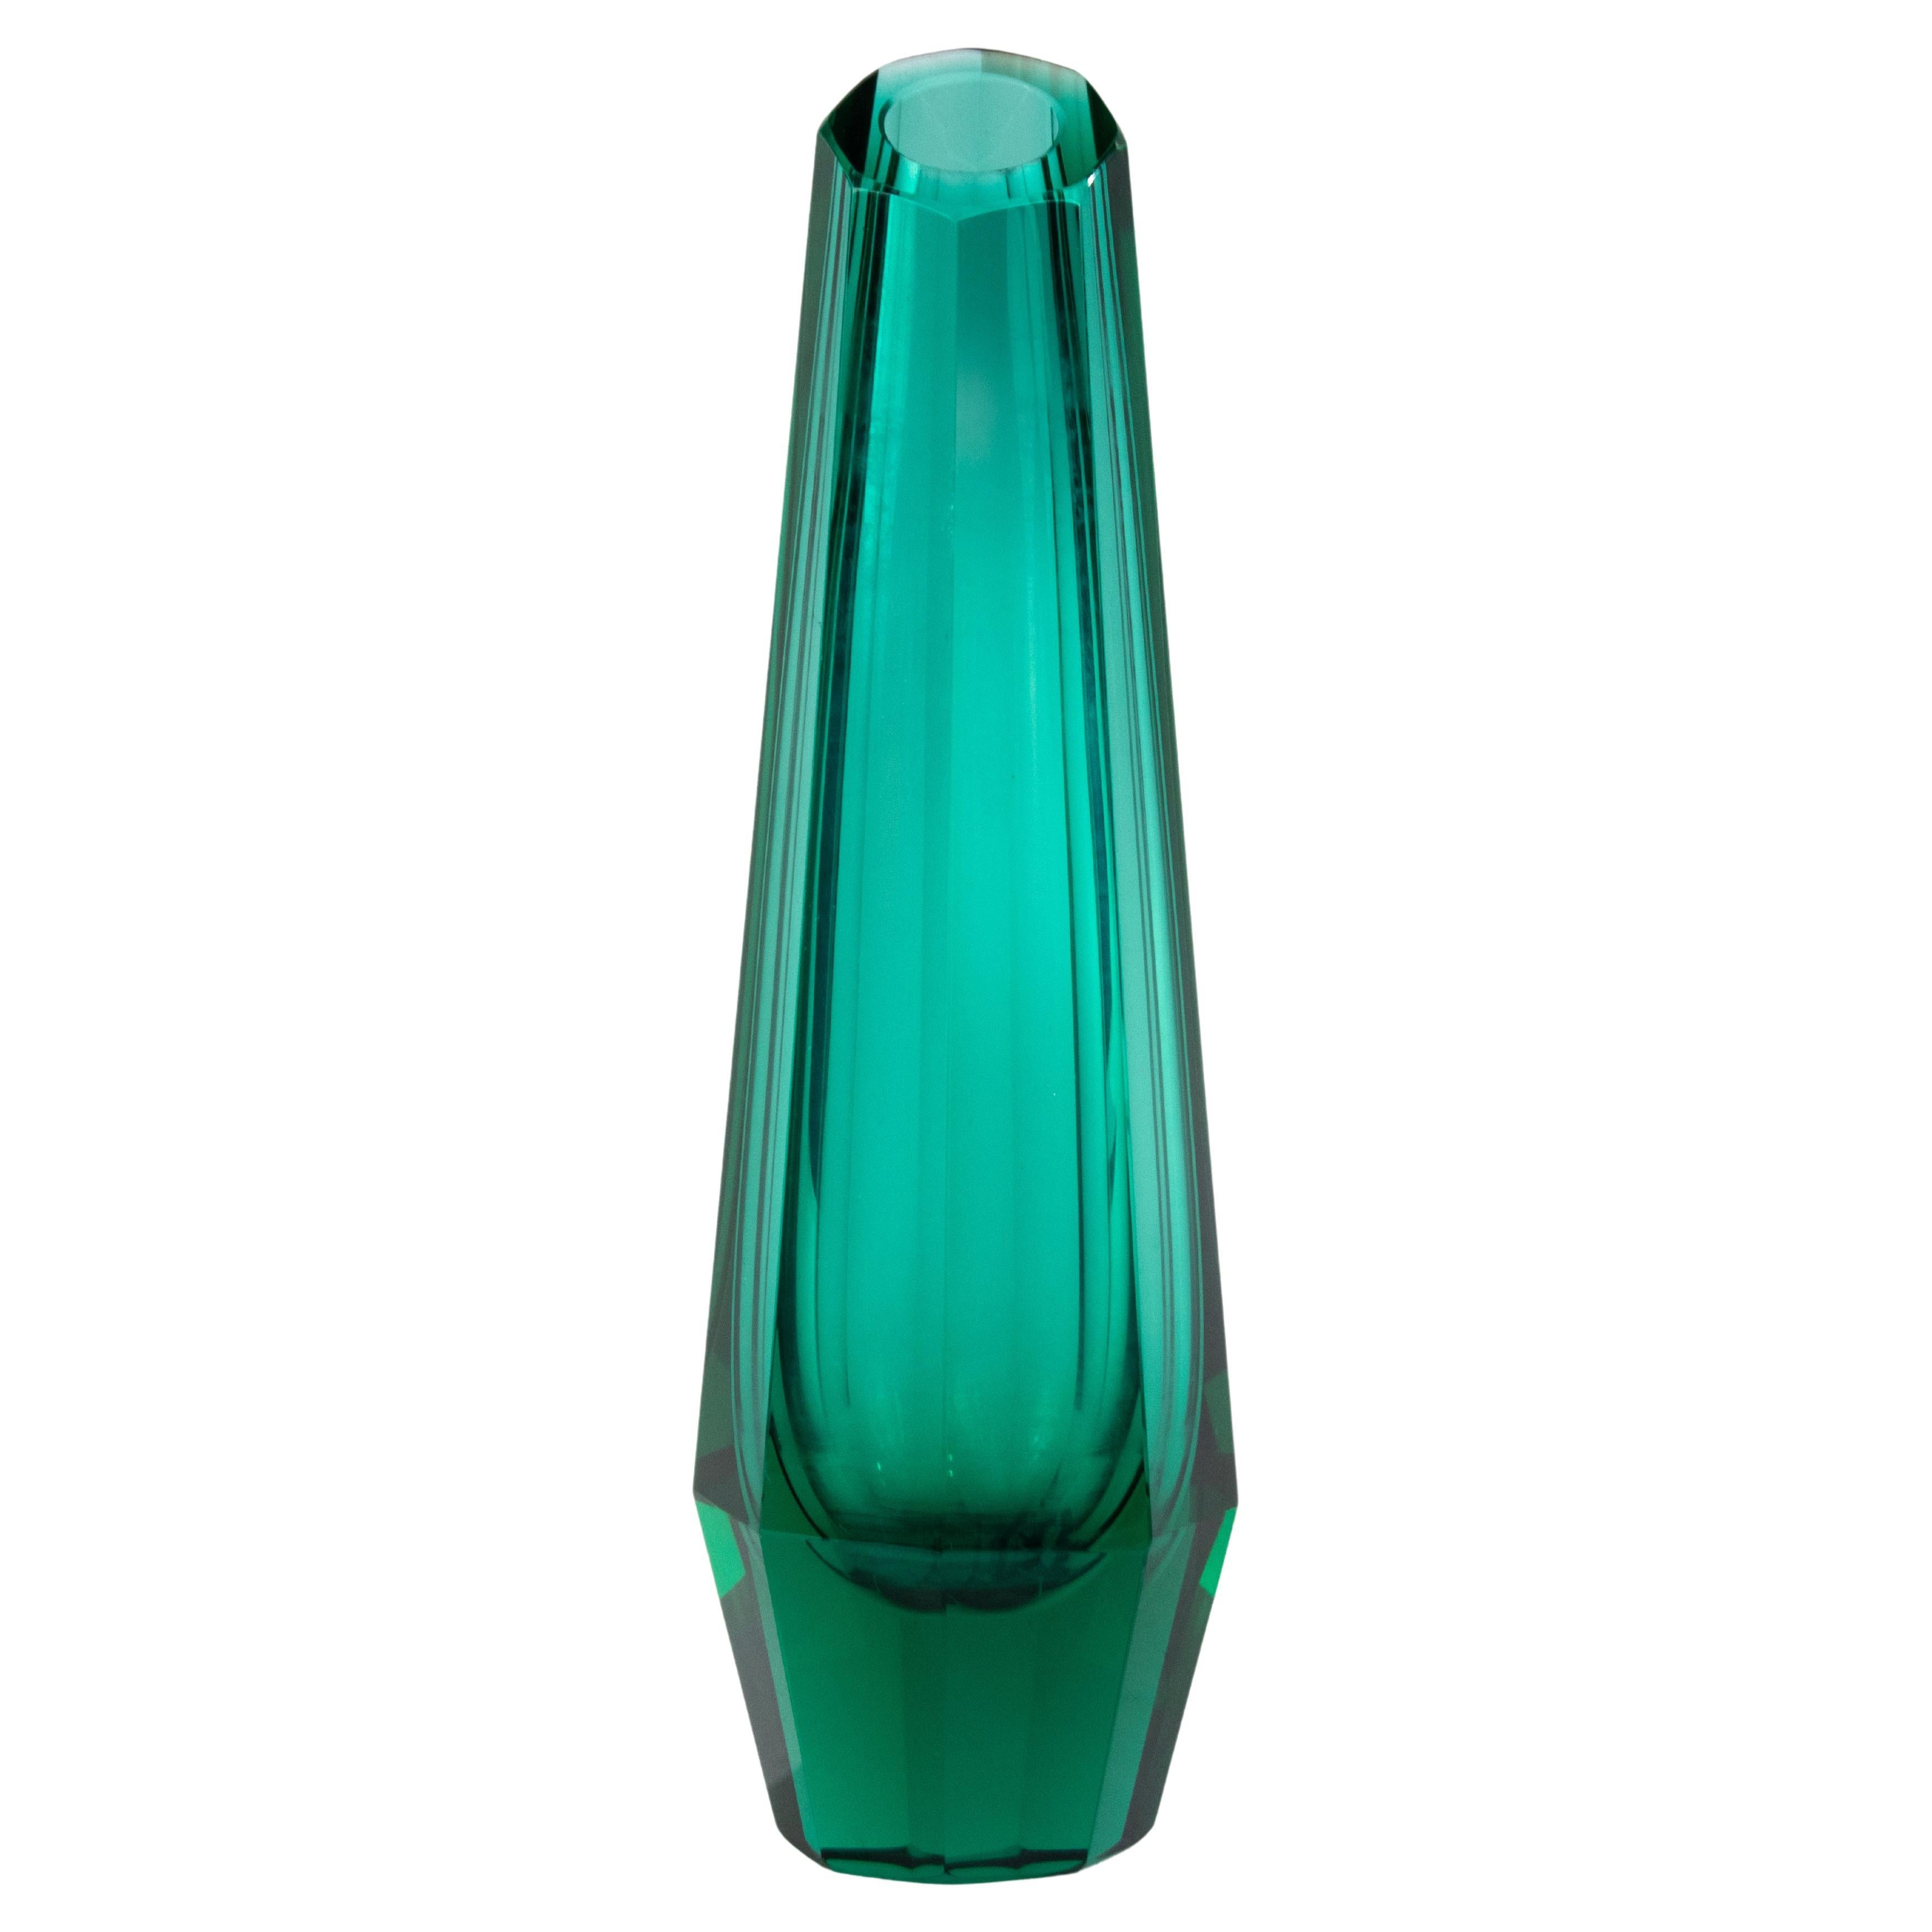 1930's Art Deco Crystal Vase - Attributed to Josef Hoffmann for Moser